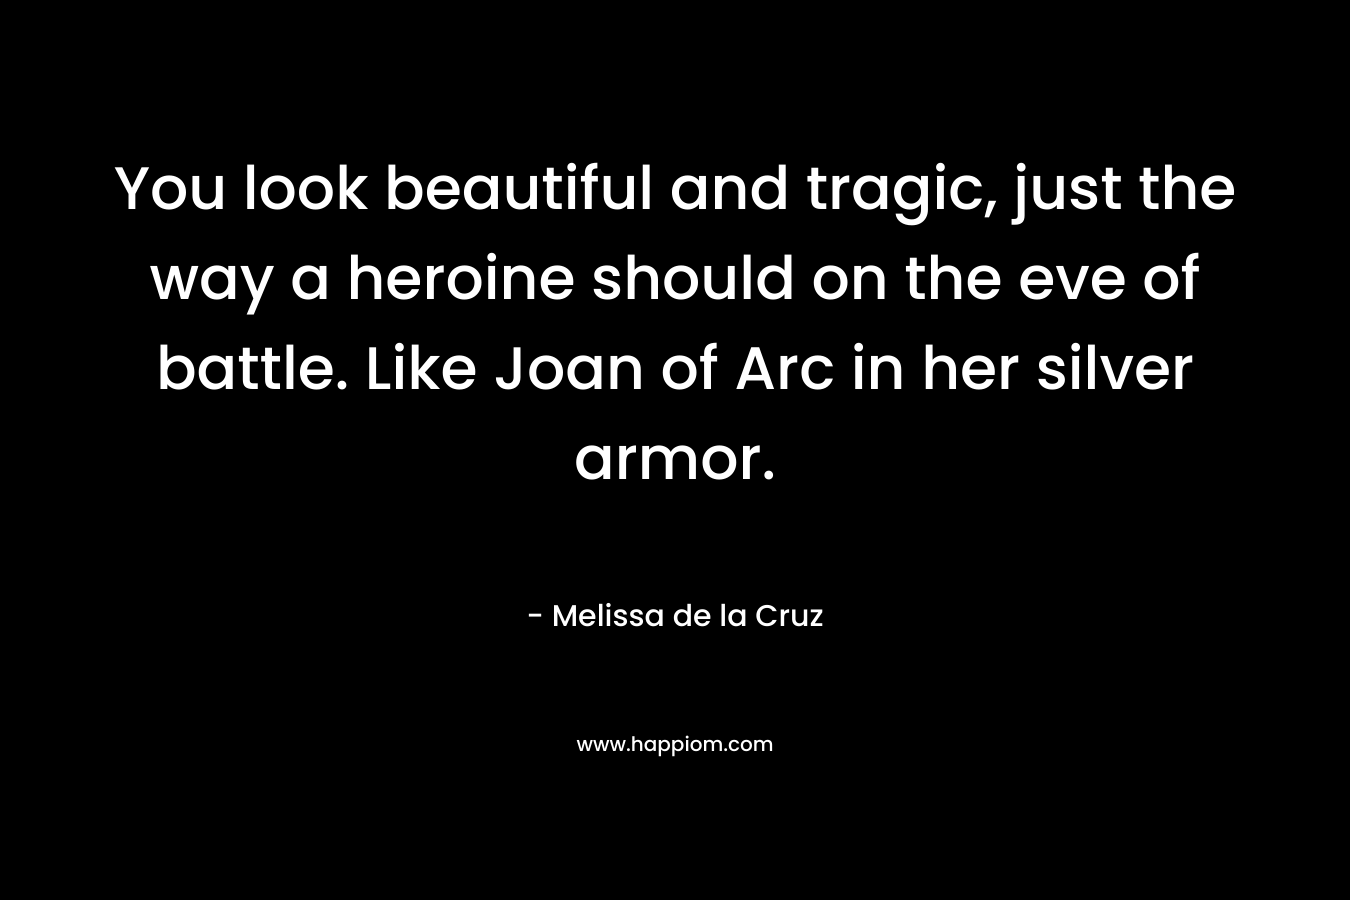 You look beautiful and tragic, just the way a heroine should on the eve of battle. Like Joan of Arc in her silver armor. – Melissa de la Cruz